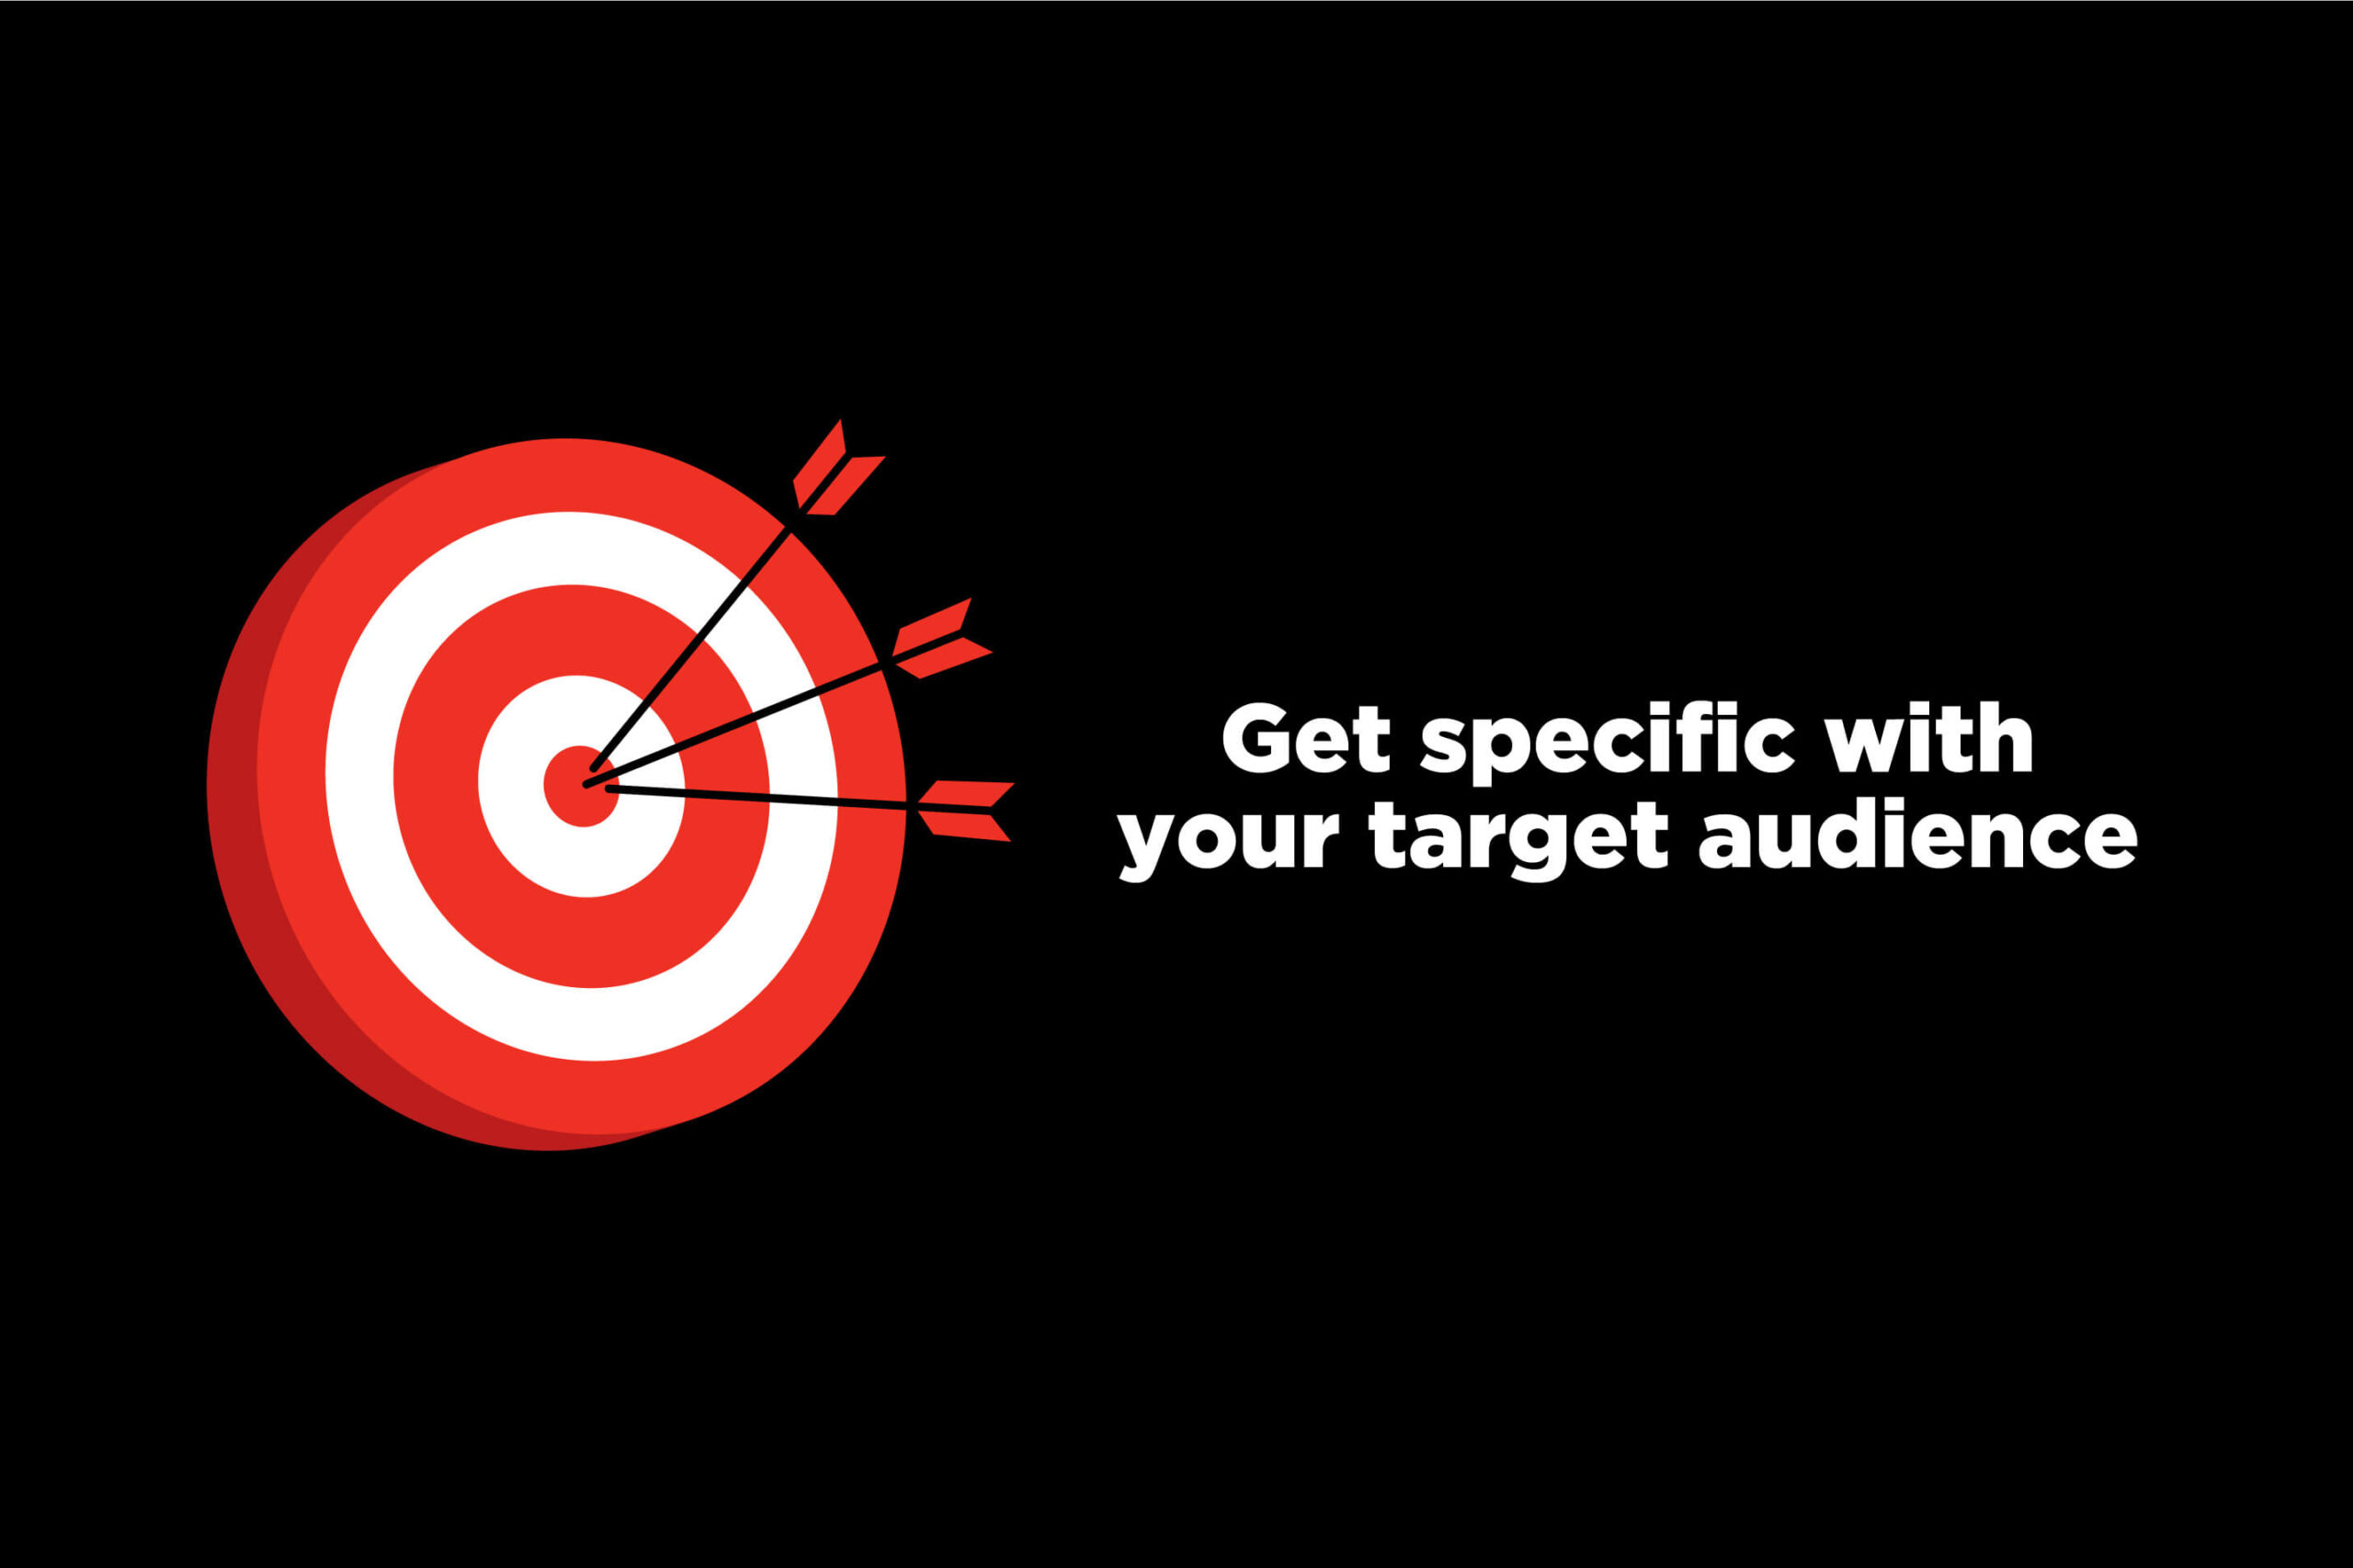 Get specific with your target audience